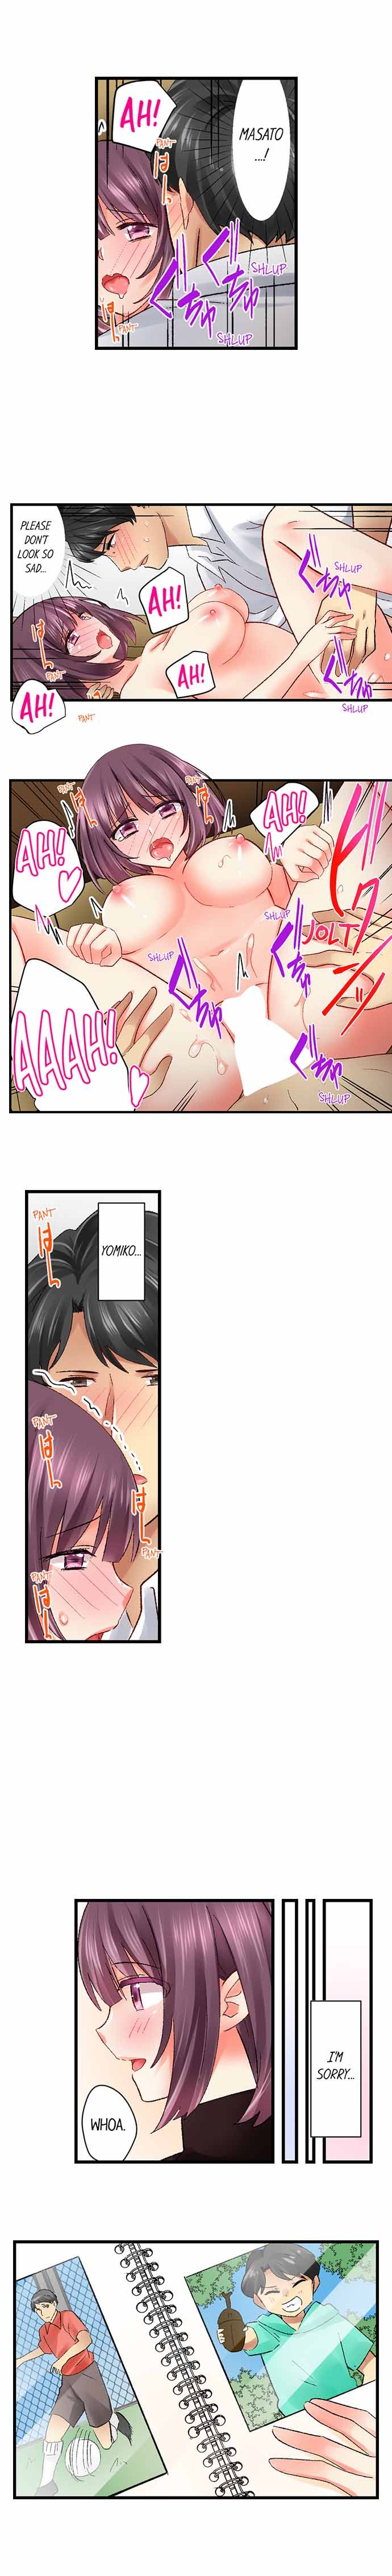 Our Kinky Newlywed Life - Chapter 42 Page 7